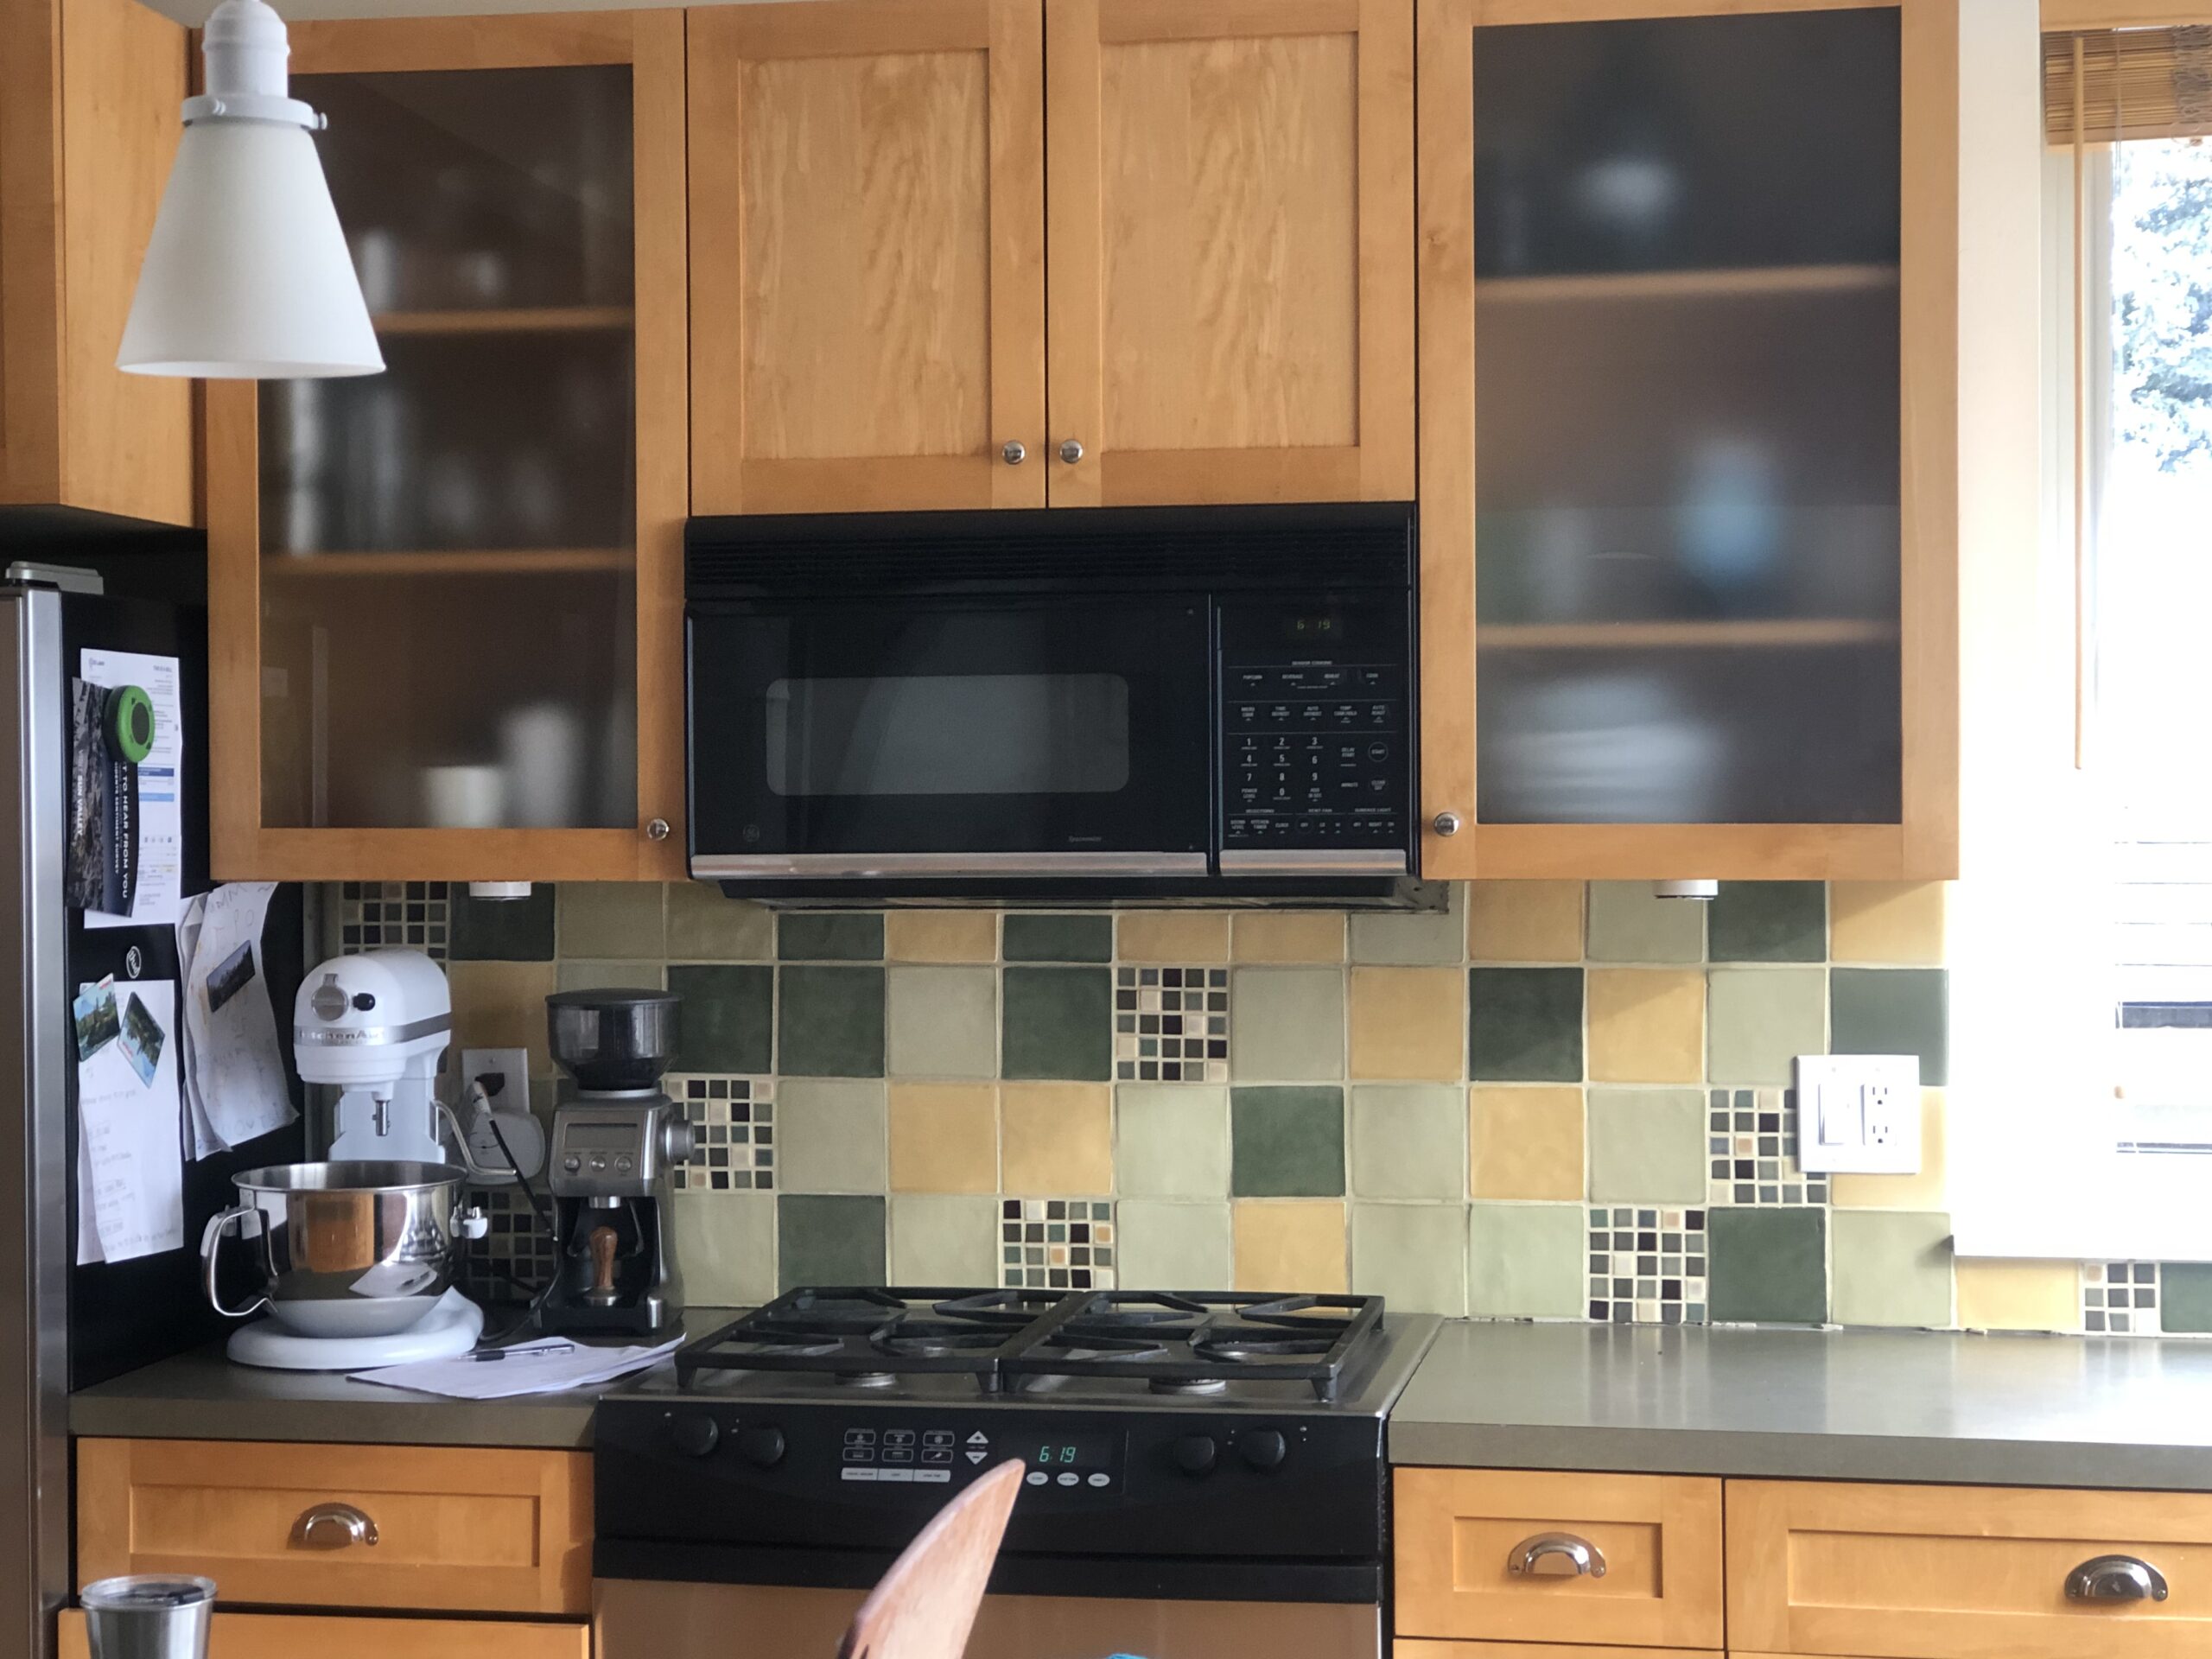 Outdated Formica kitchen countertops and tiled backsplash